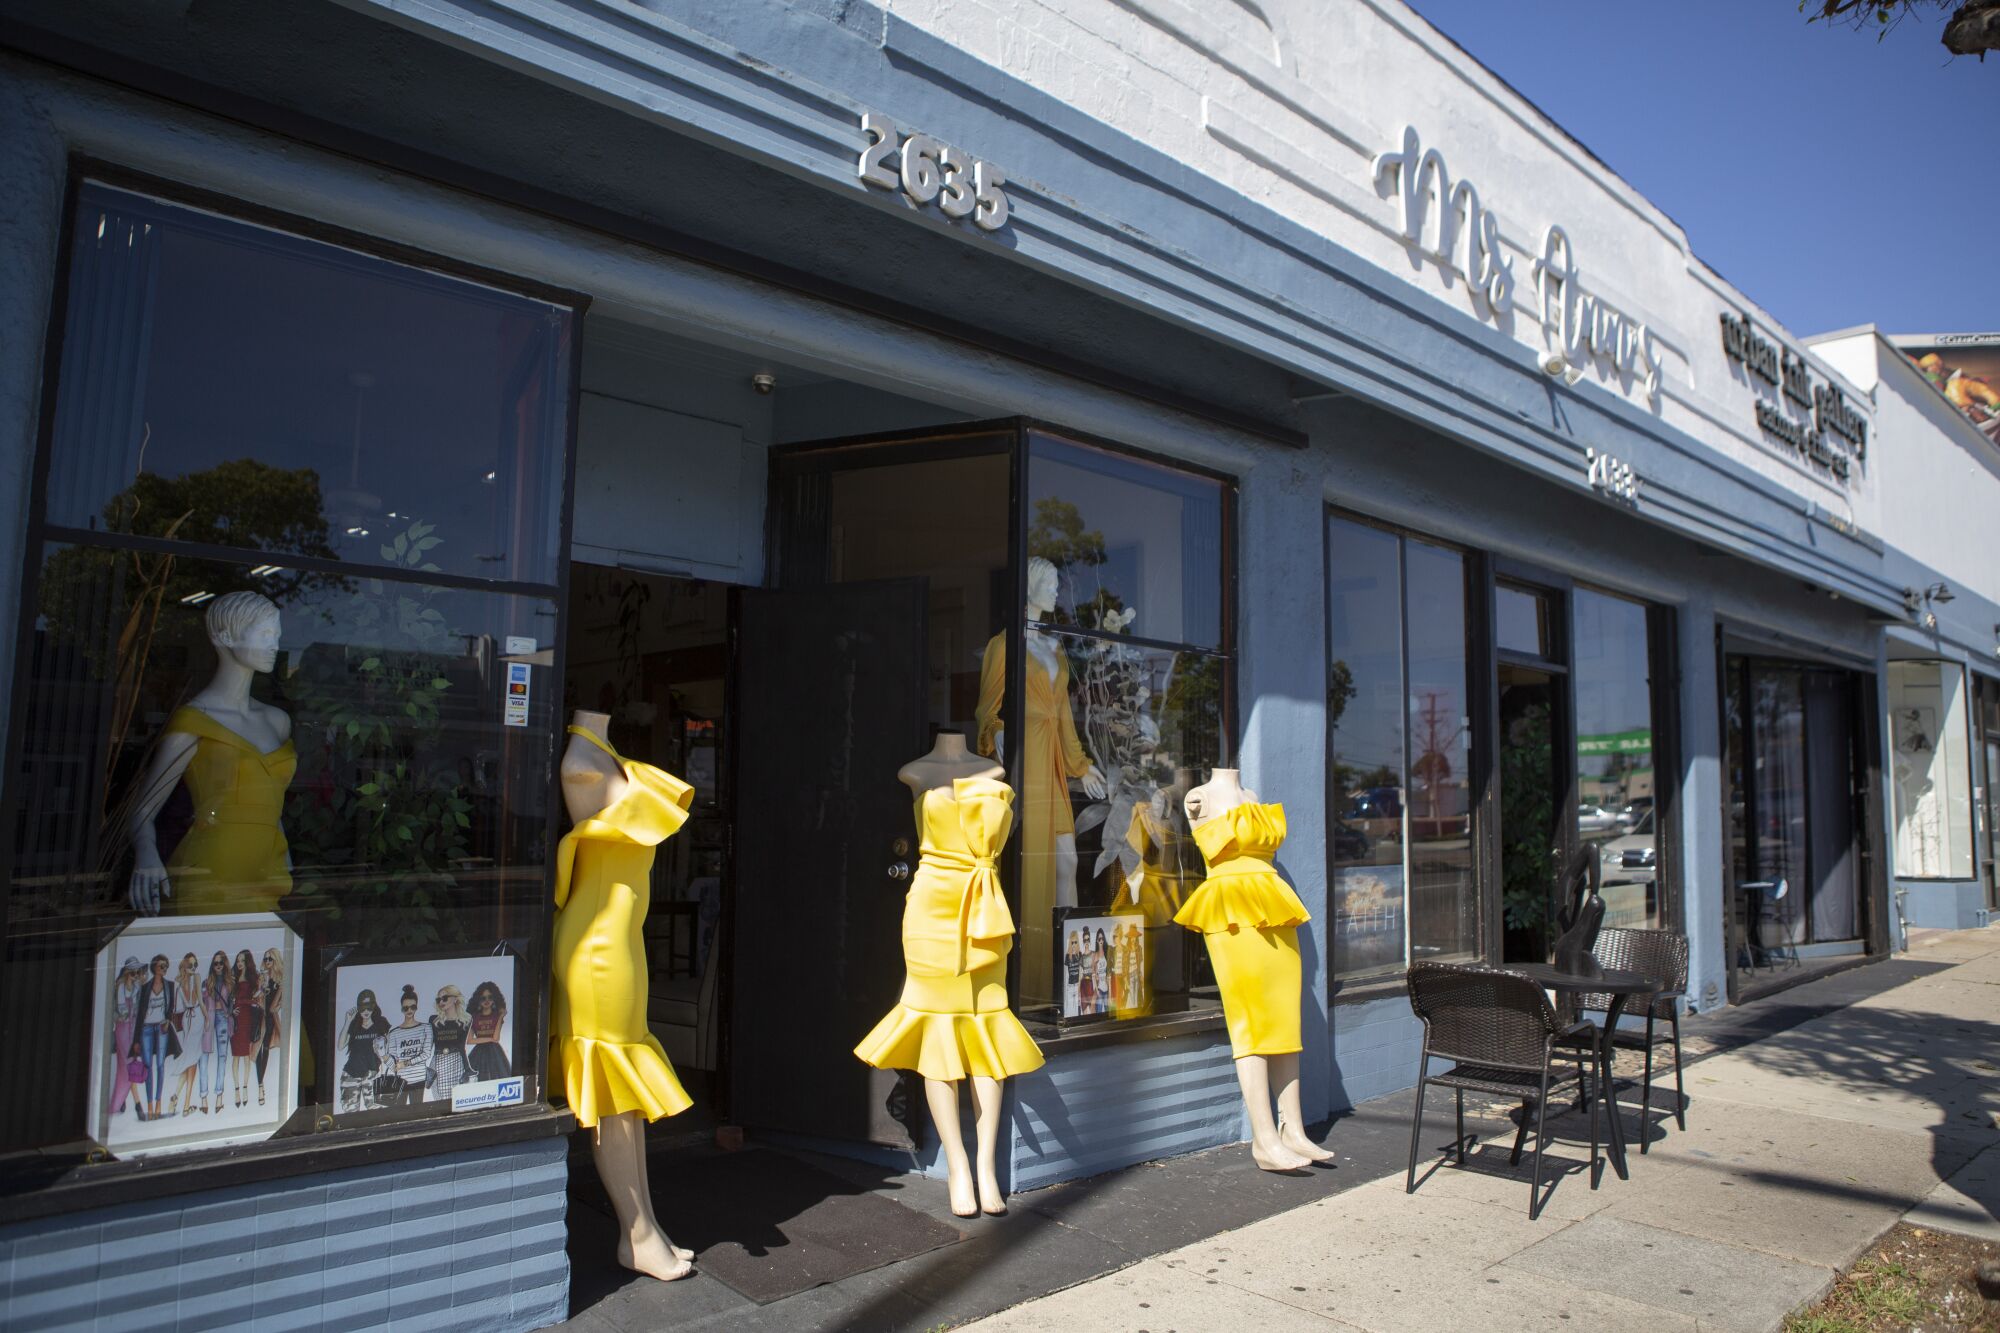 Mannequins in yellow dresses in the window of a storefront and on the sidewalk near the door